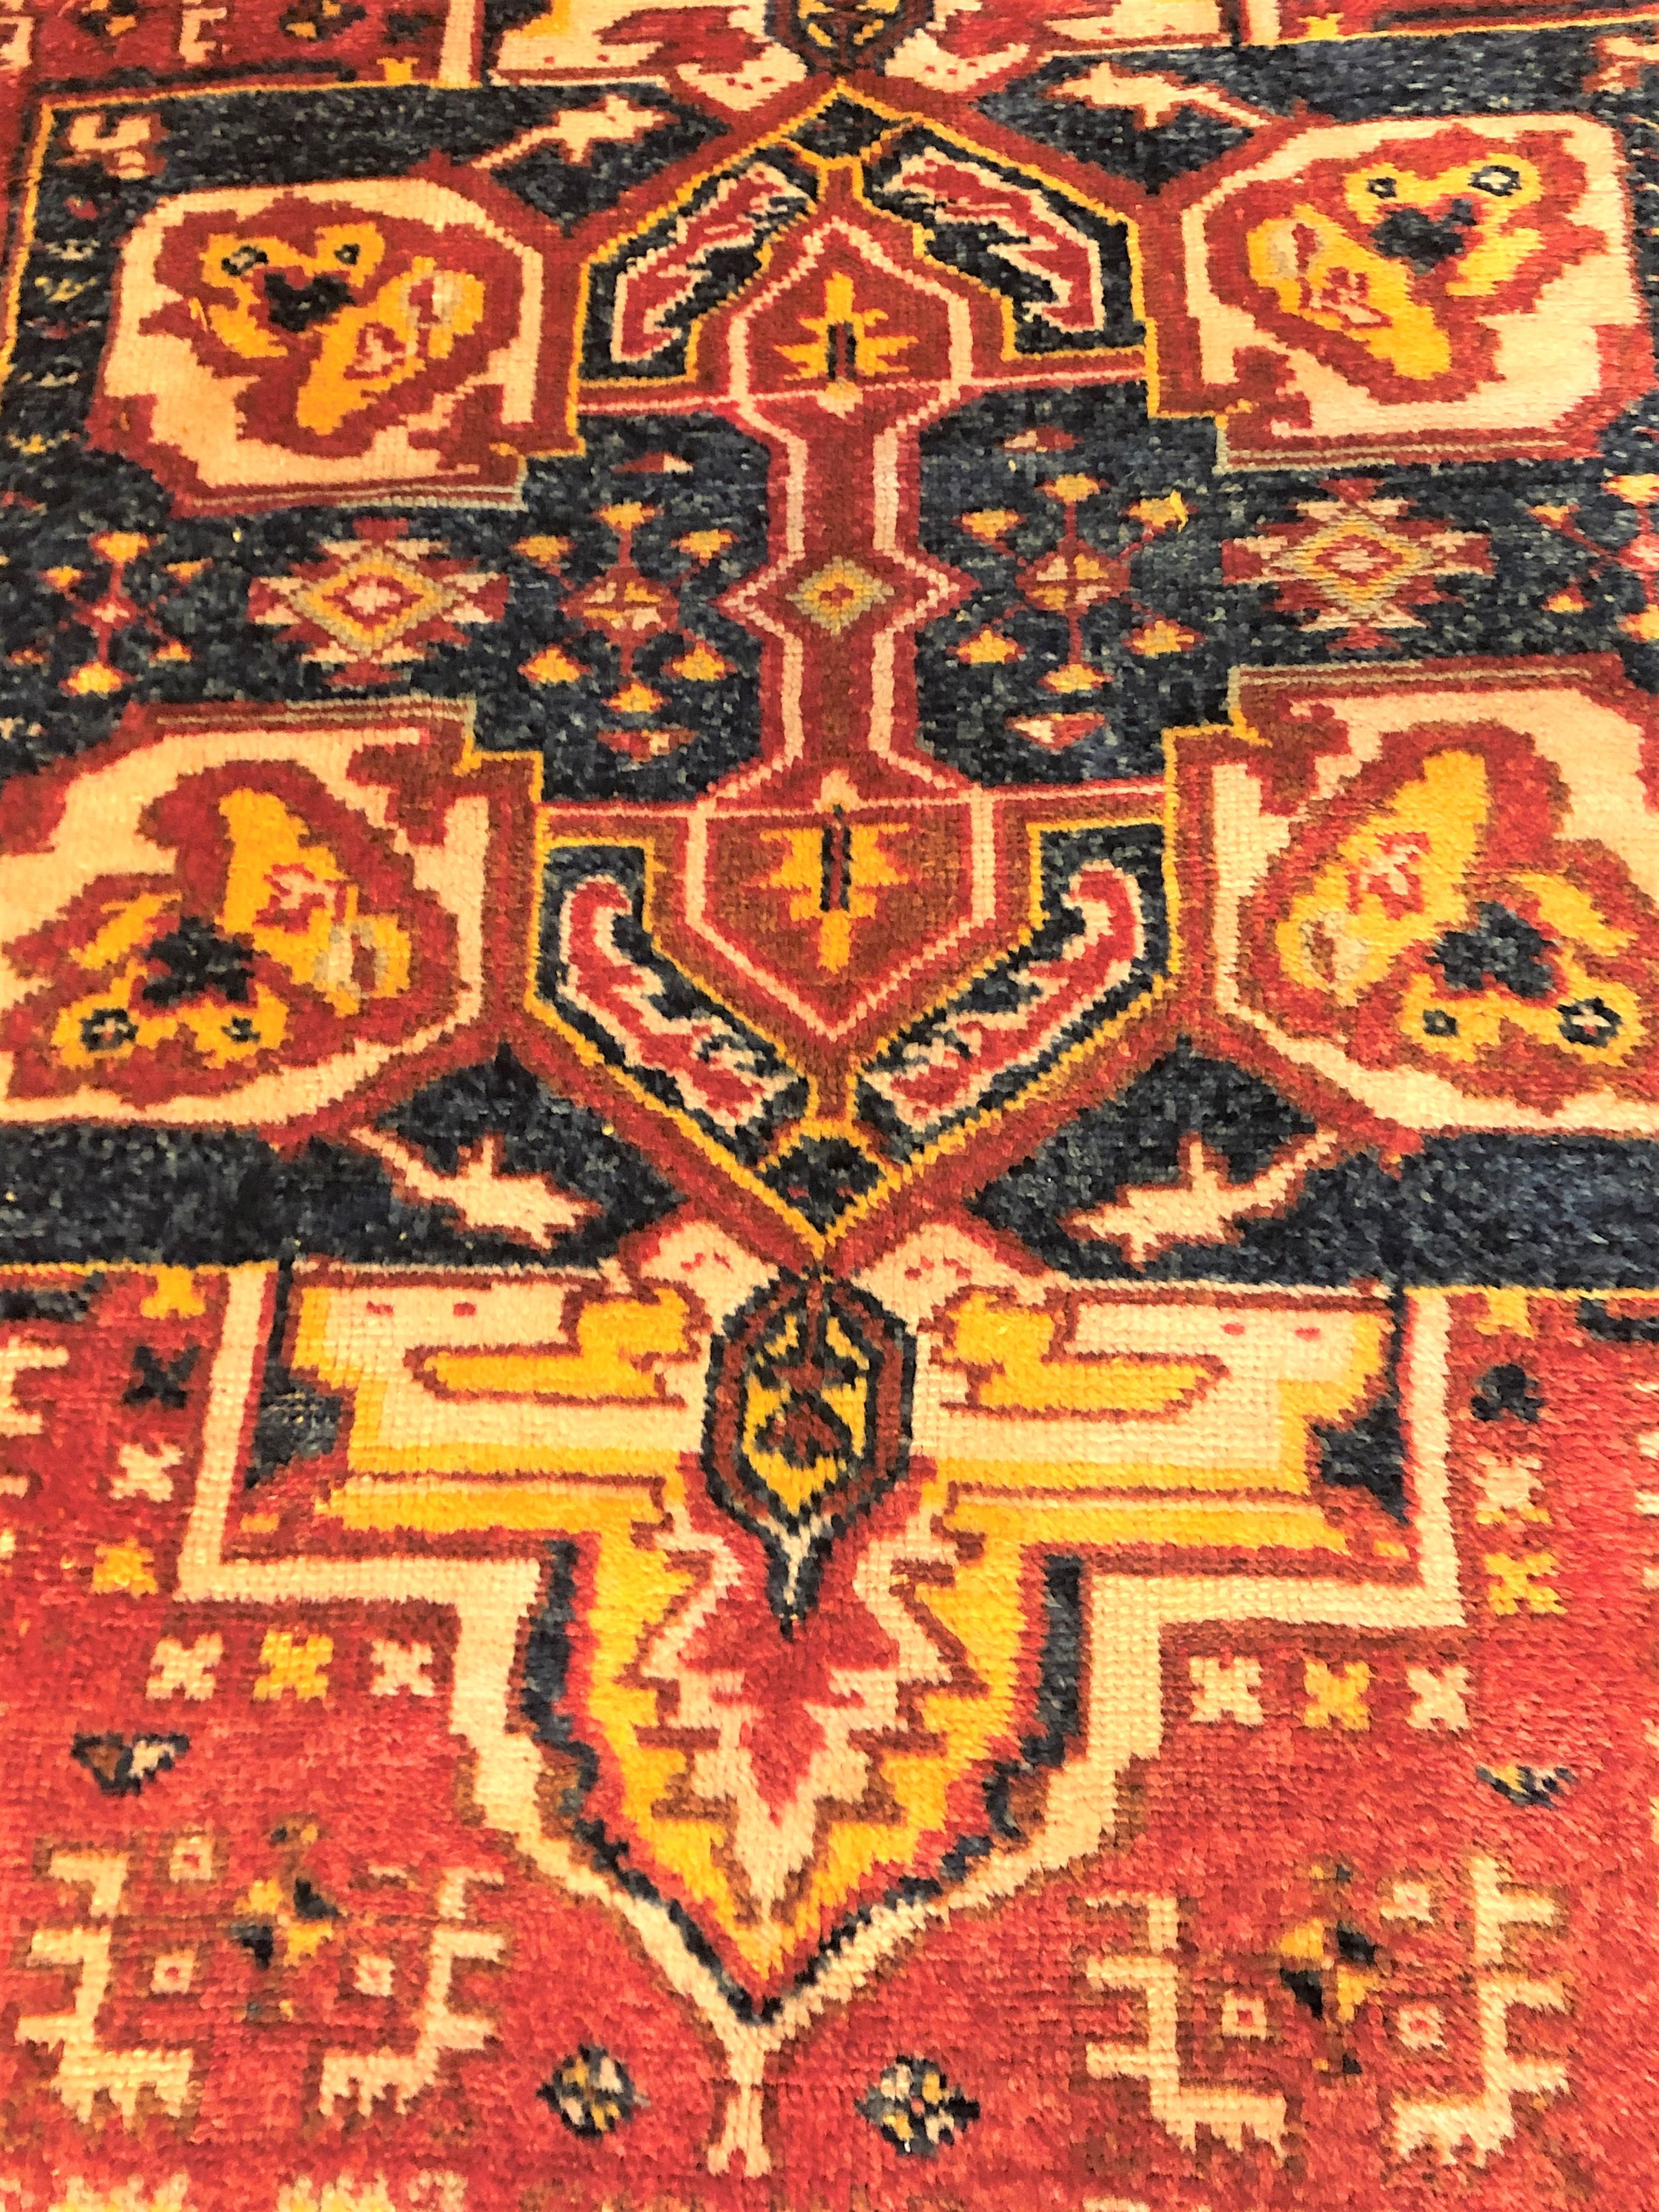 Hand-Knotted 20th Century Sun Colours Yellow Orange Blu Berber Rug € 2500, ca 1950 For Sale